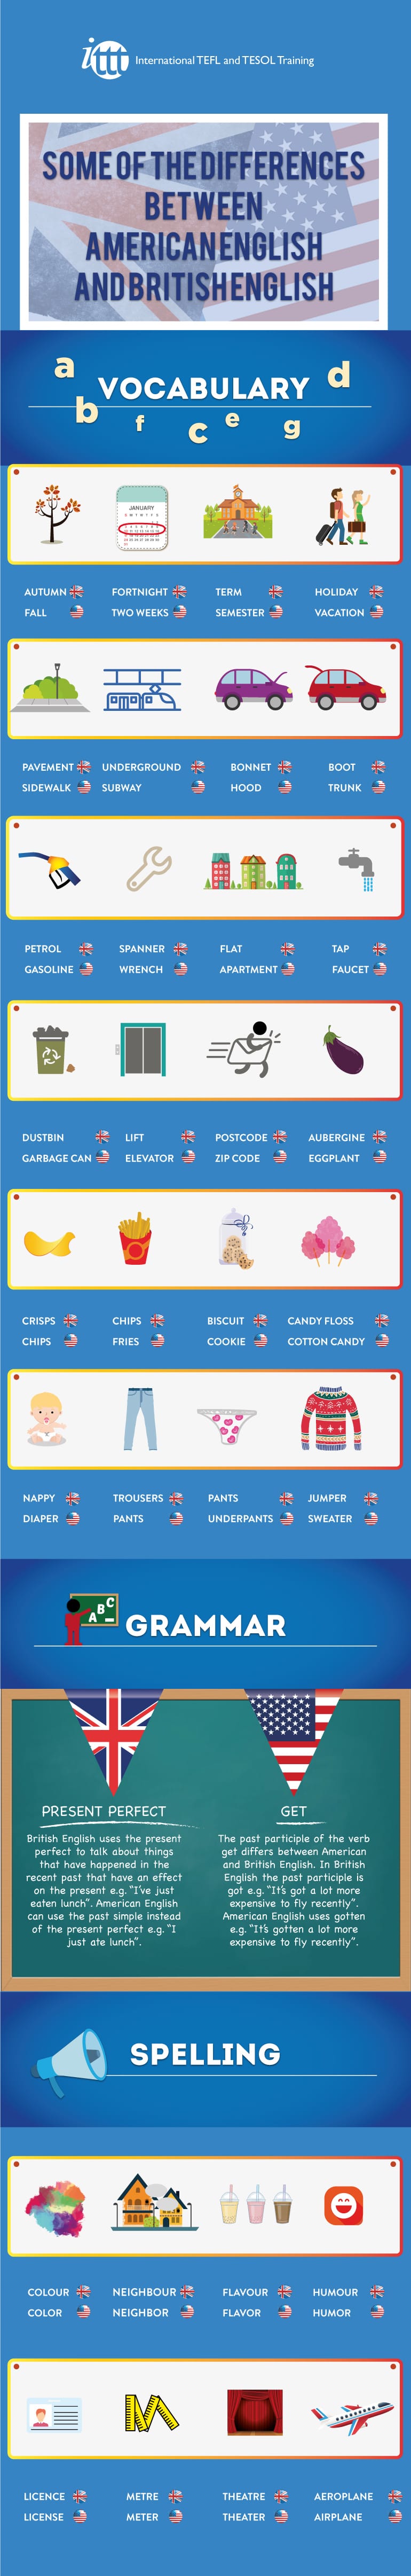 Infographic Some of the differences between American English and British English